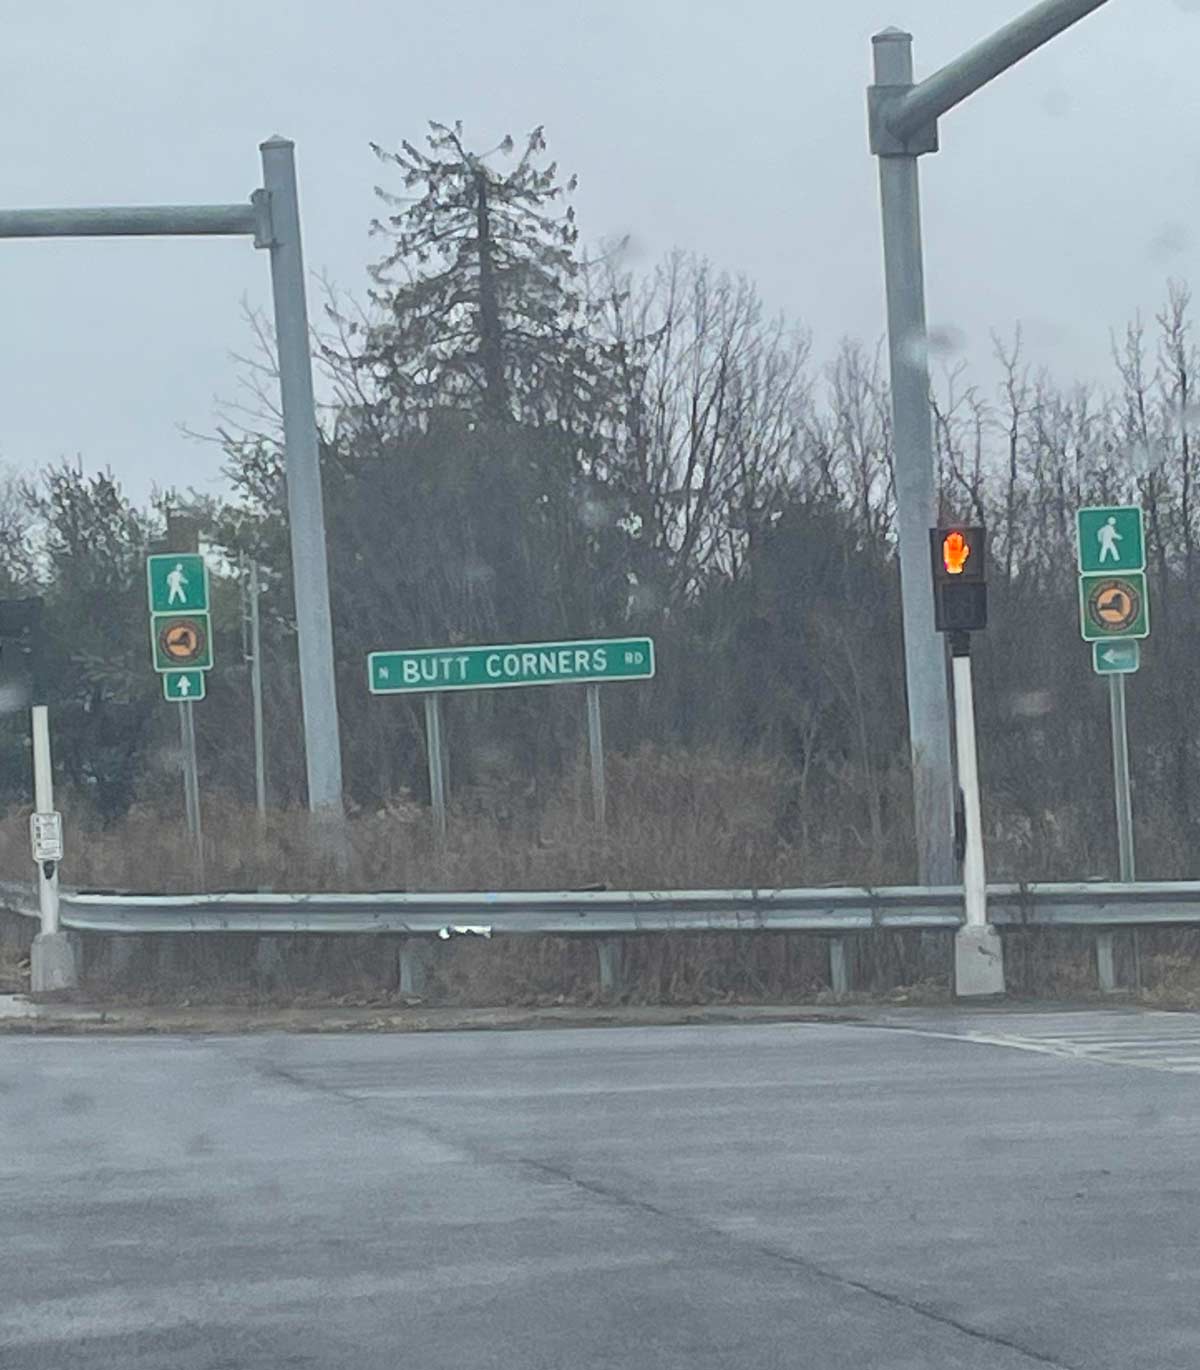 Someone changed all the street signs in my town form Putt Corners to Butt Corners